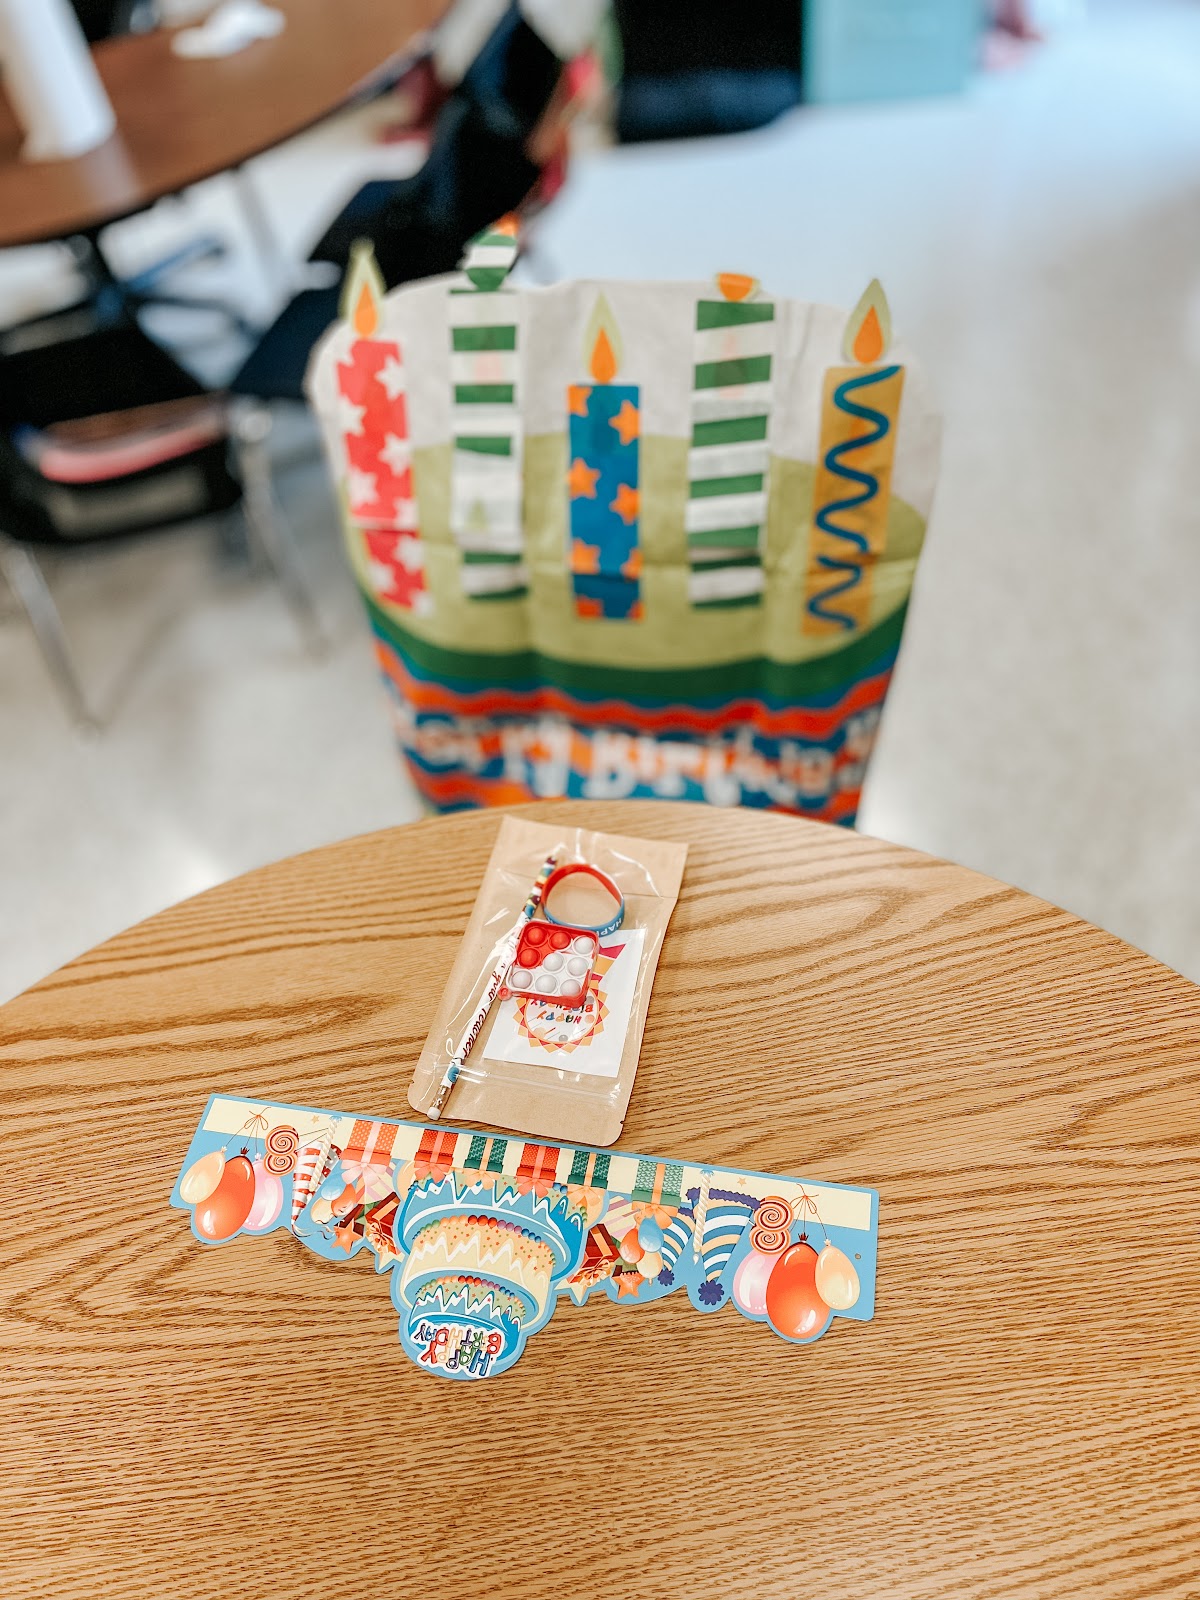 Celebrating classroom birthdays with your students can be fun and inexpensive.  Here's a blog post on how to celebrate student birthdays.